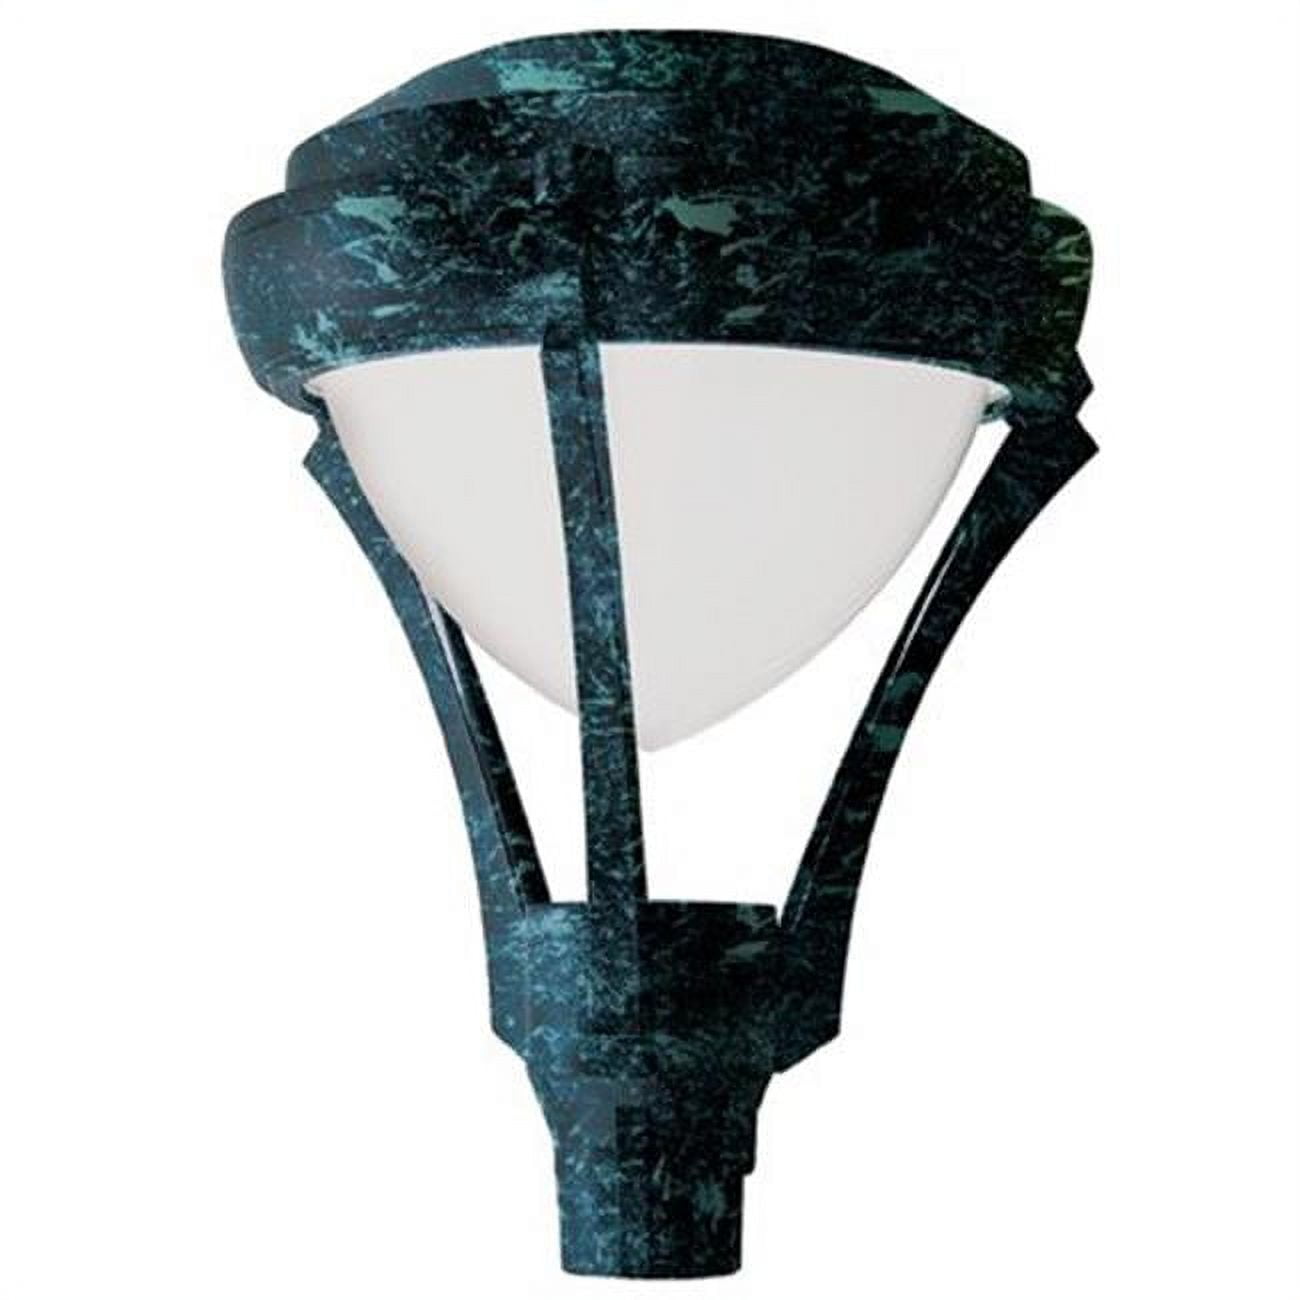 Picture of Dabmar Lighting GM593-VG 120W 120V Powder Coated Cast Aluminum Post Top Light Fixture with High Pressure Sodium Lamp, Verde Green